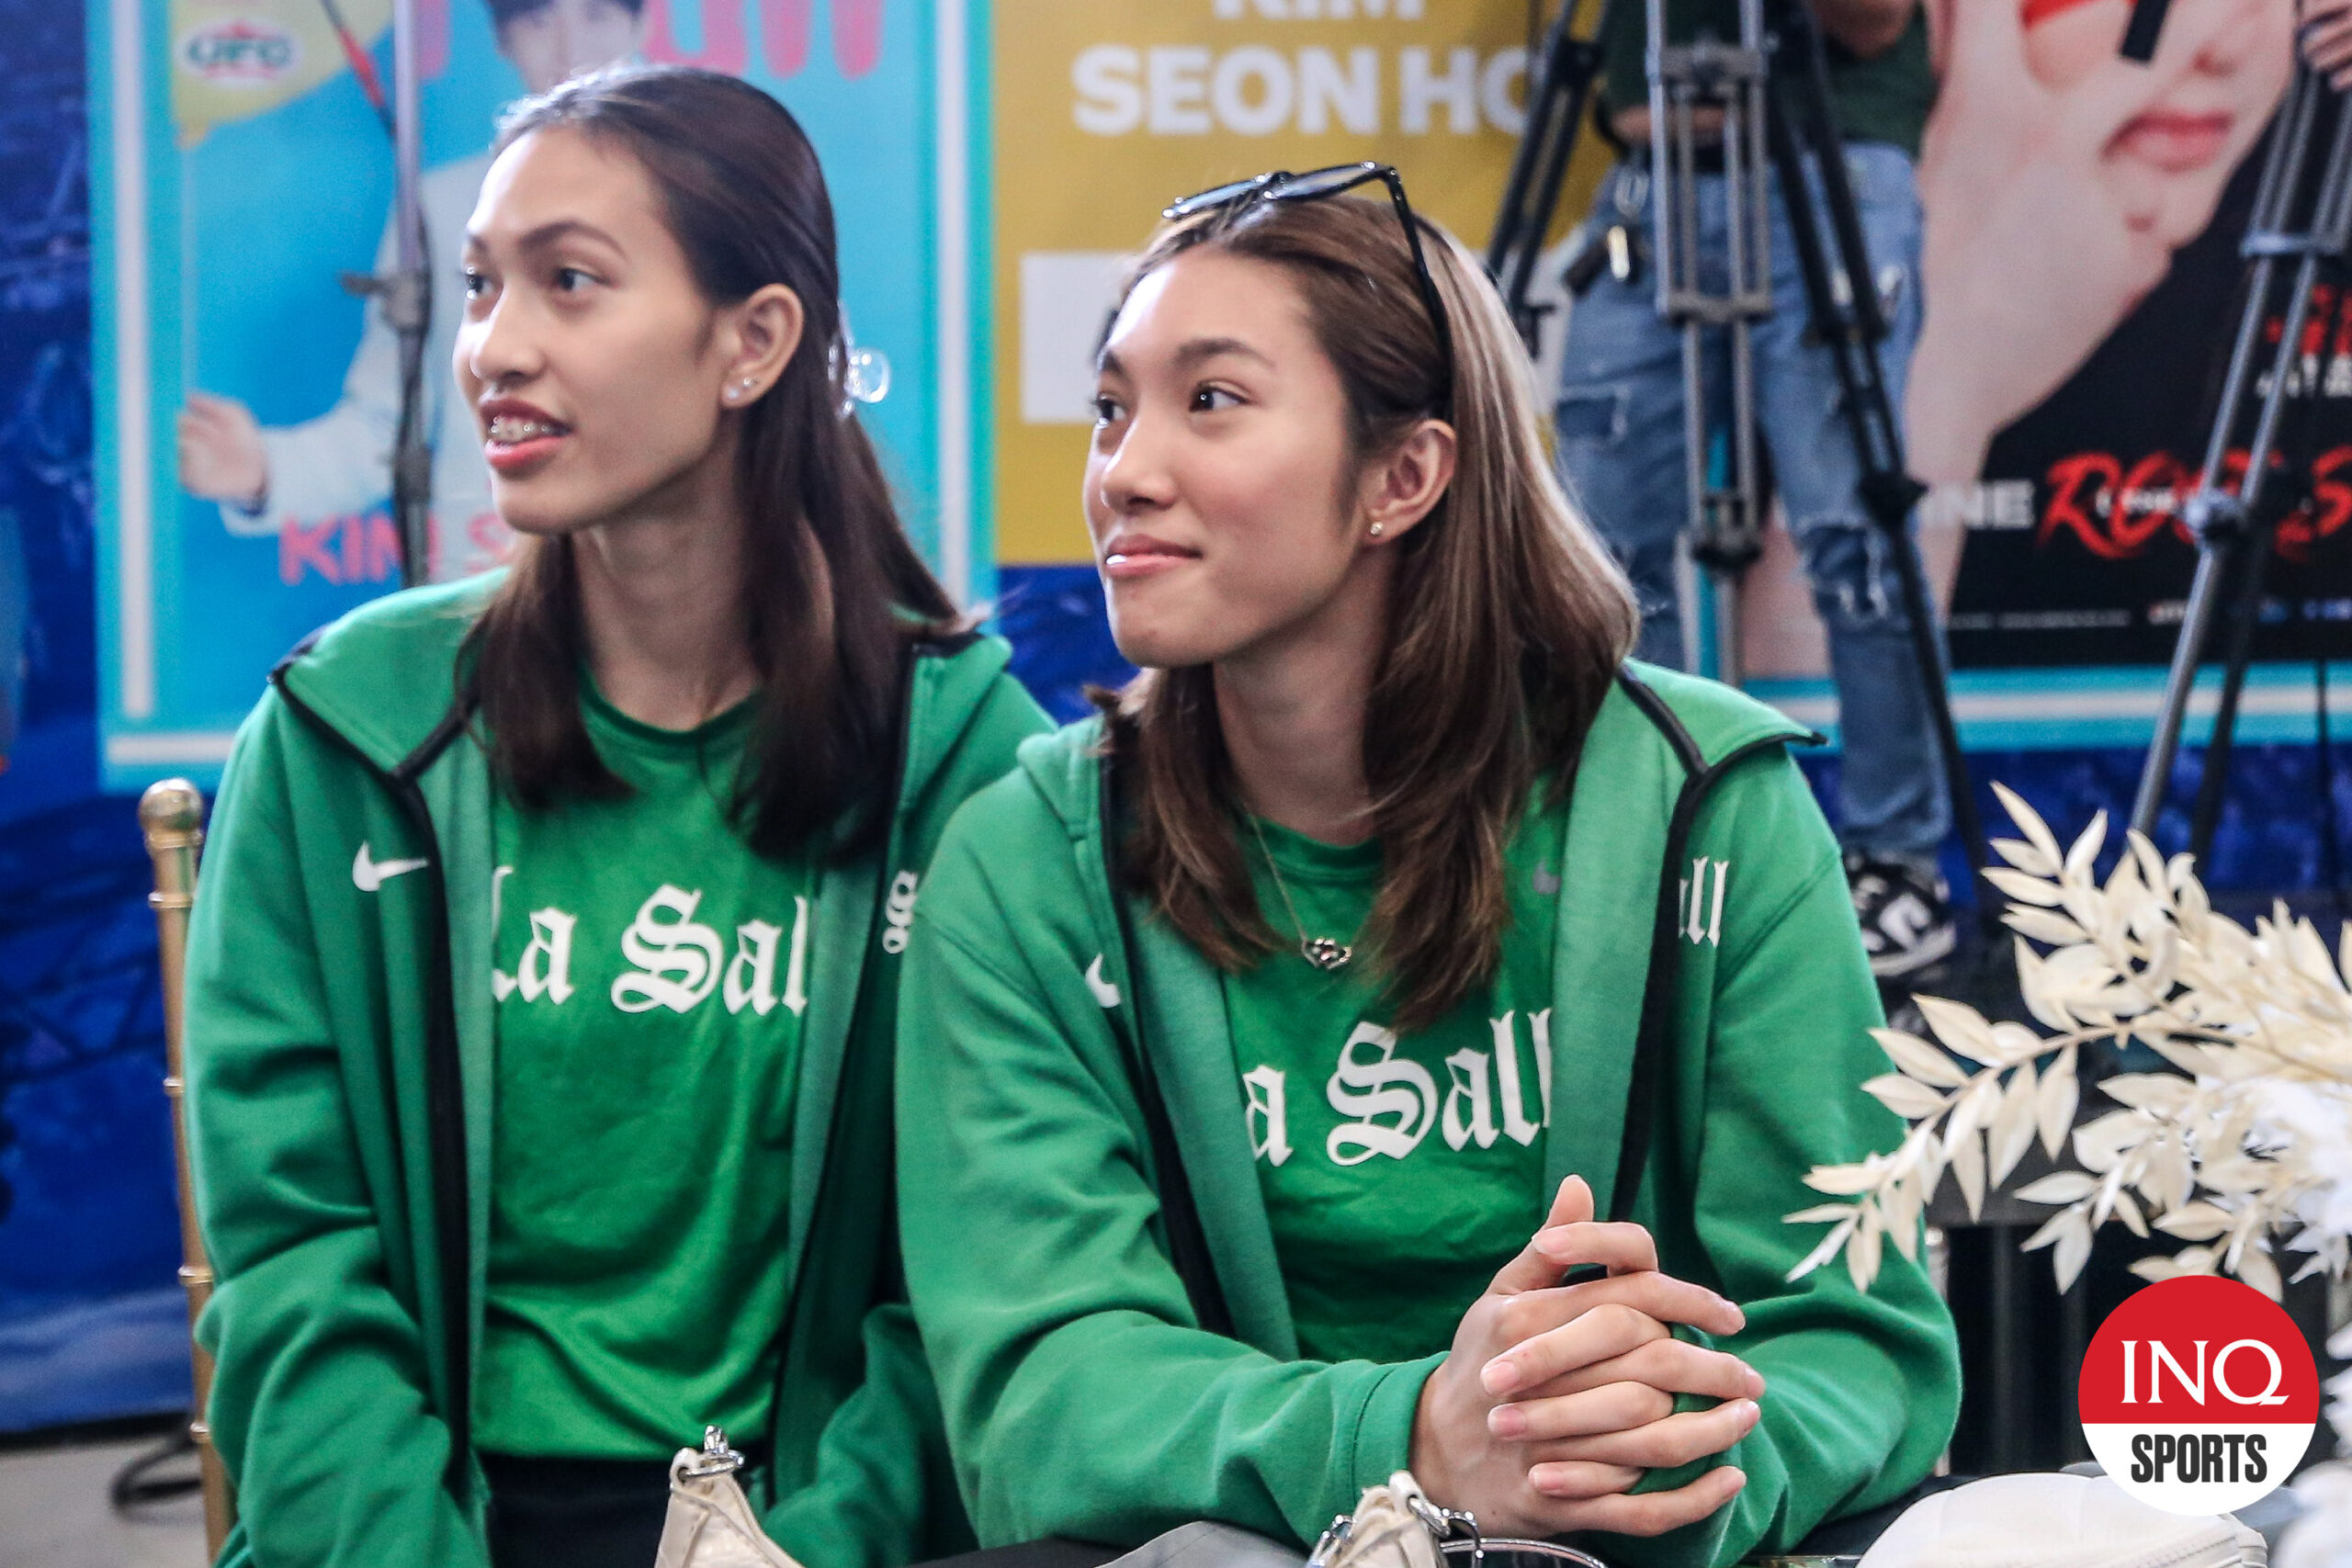 La Salle  UAAP volleyball